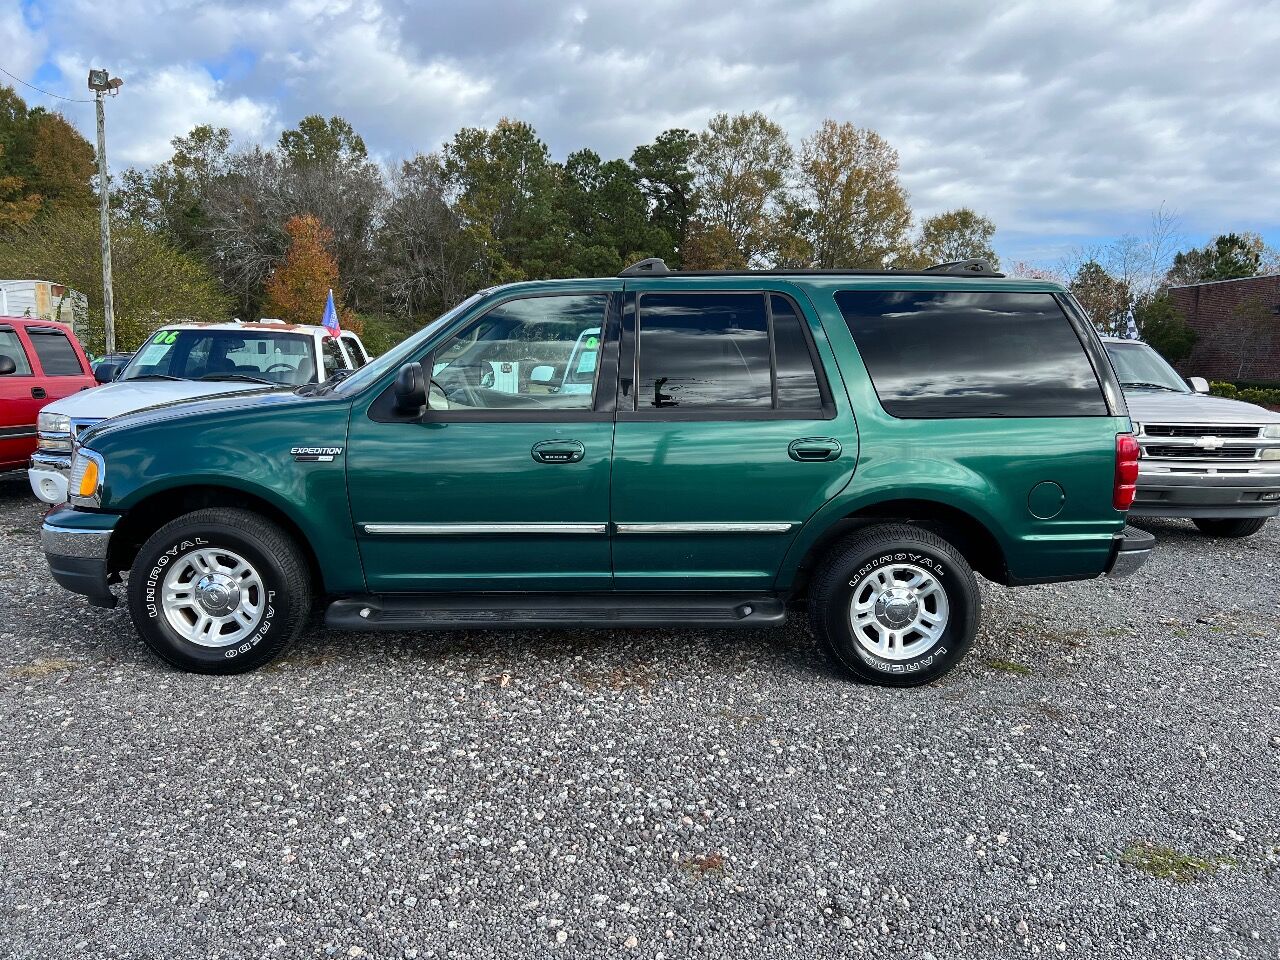 2000 Ford Expedition For Sale - Carsforsale.com®